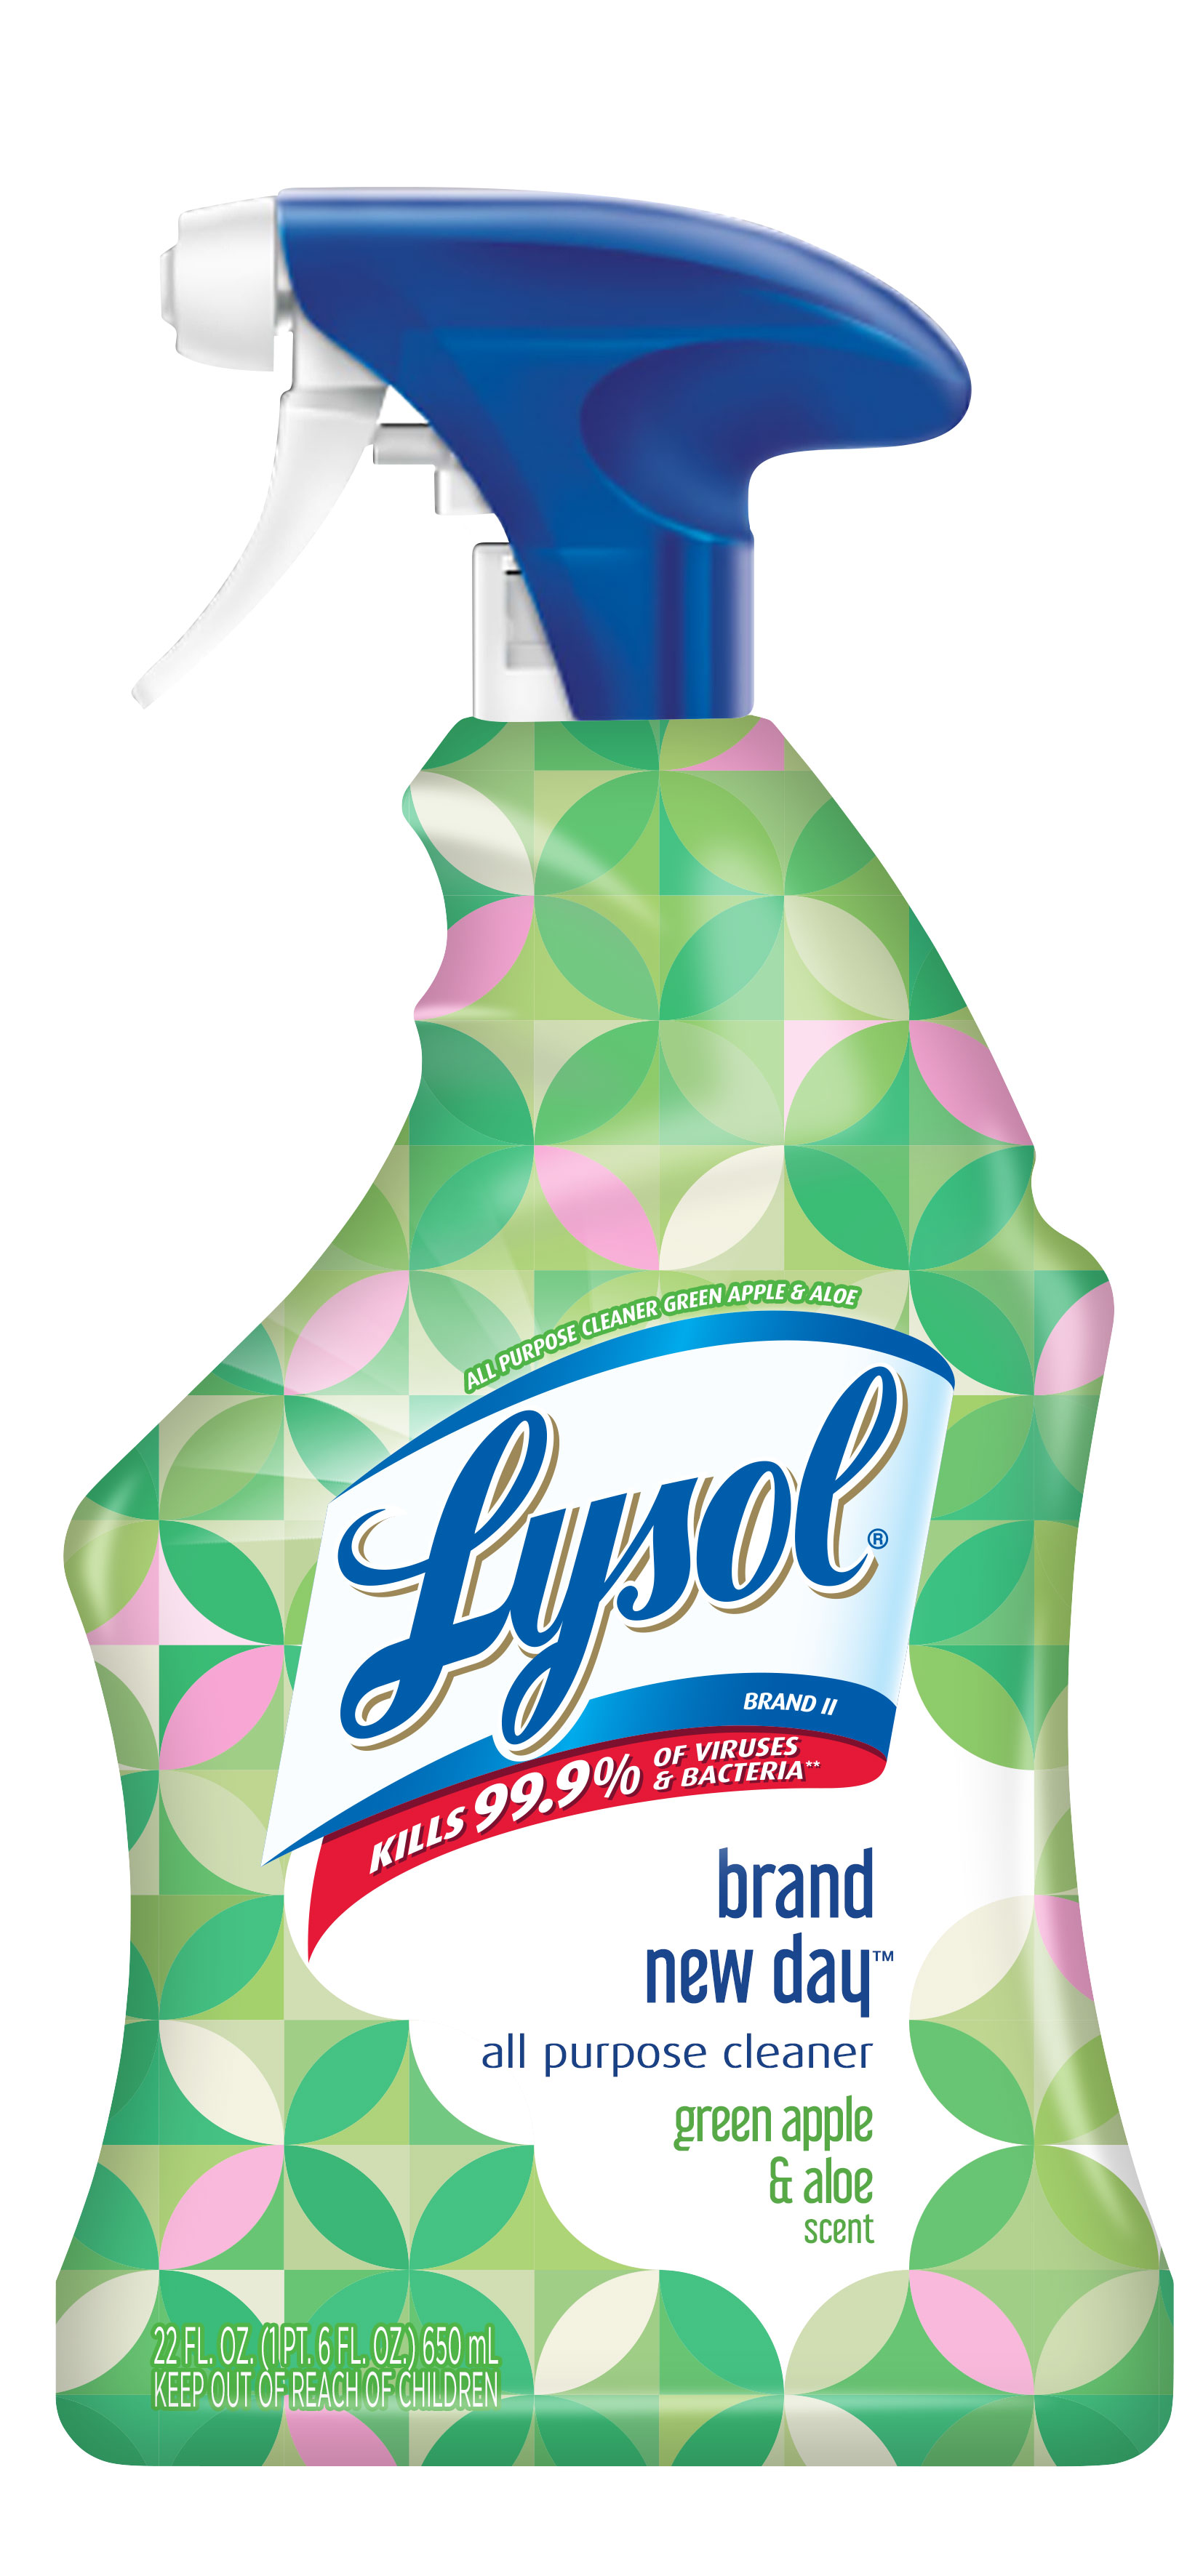 LYSOL All Purpose Cleaner  Brand New Day  Green Apple  Aloe Discontinued Jan 30 2020